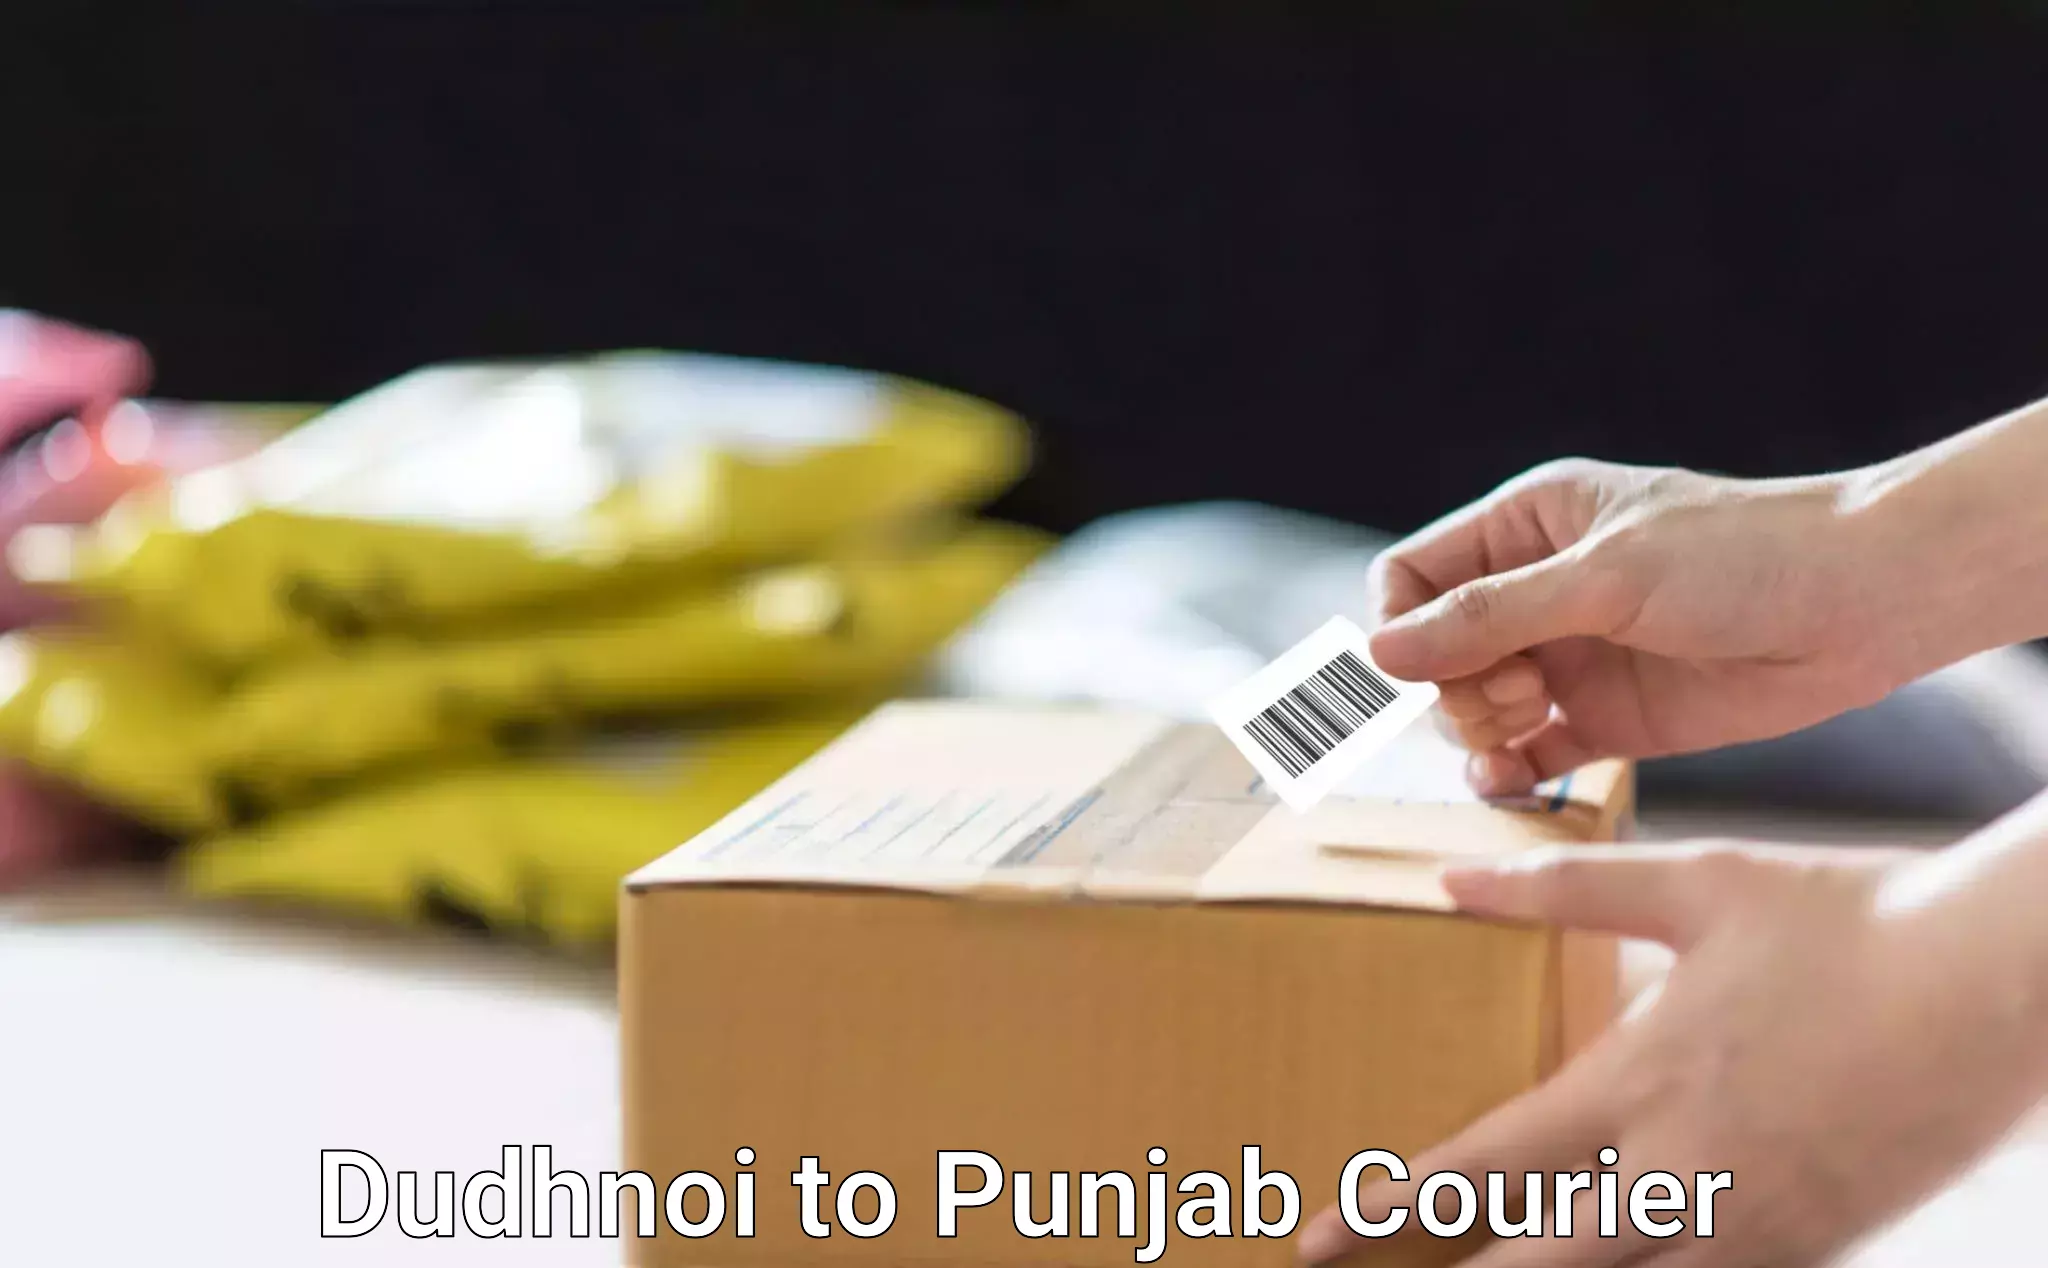 Professional courier handling Dudhnoi to Rajpura